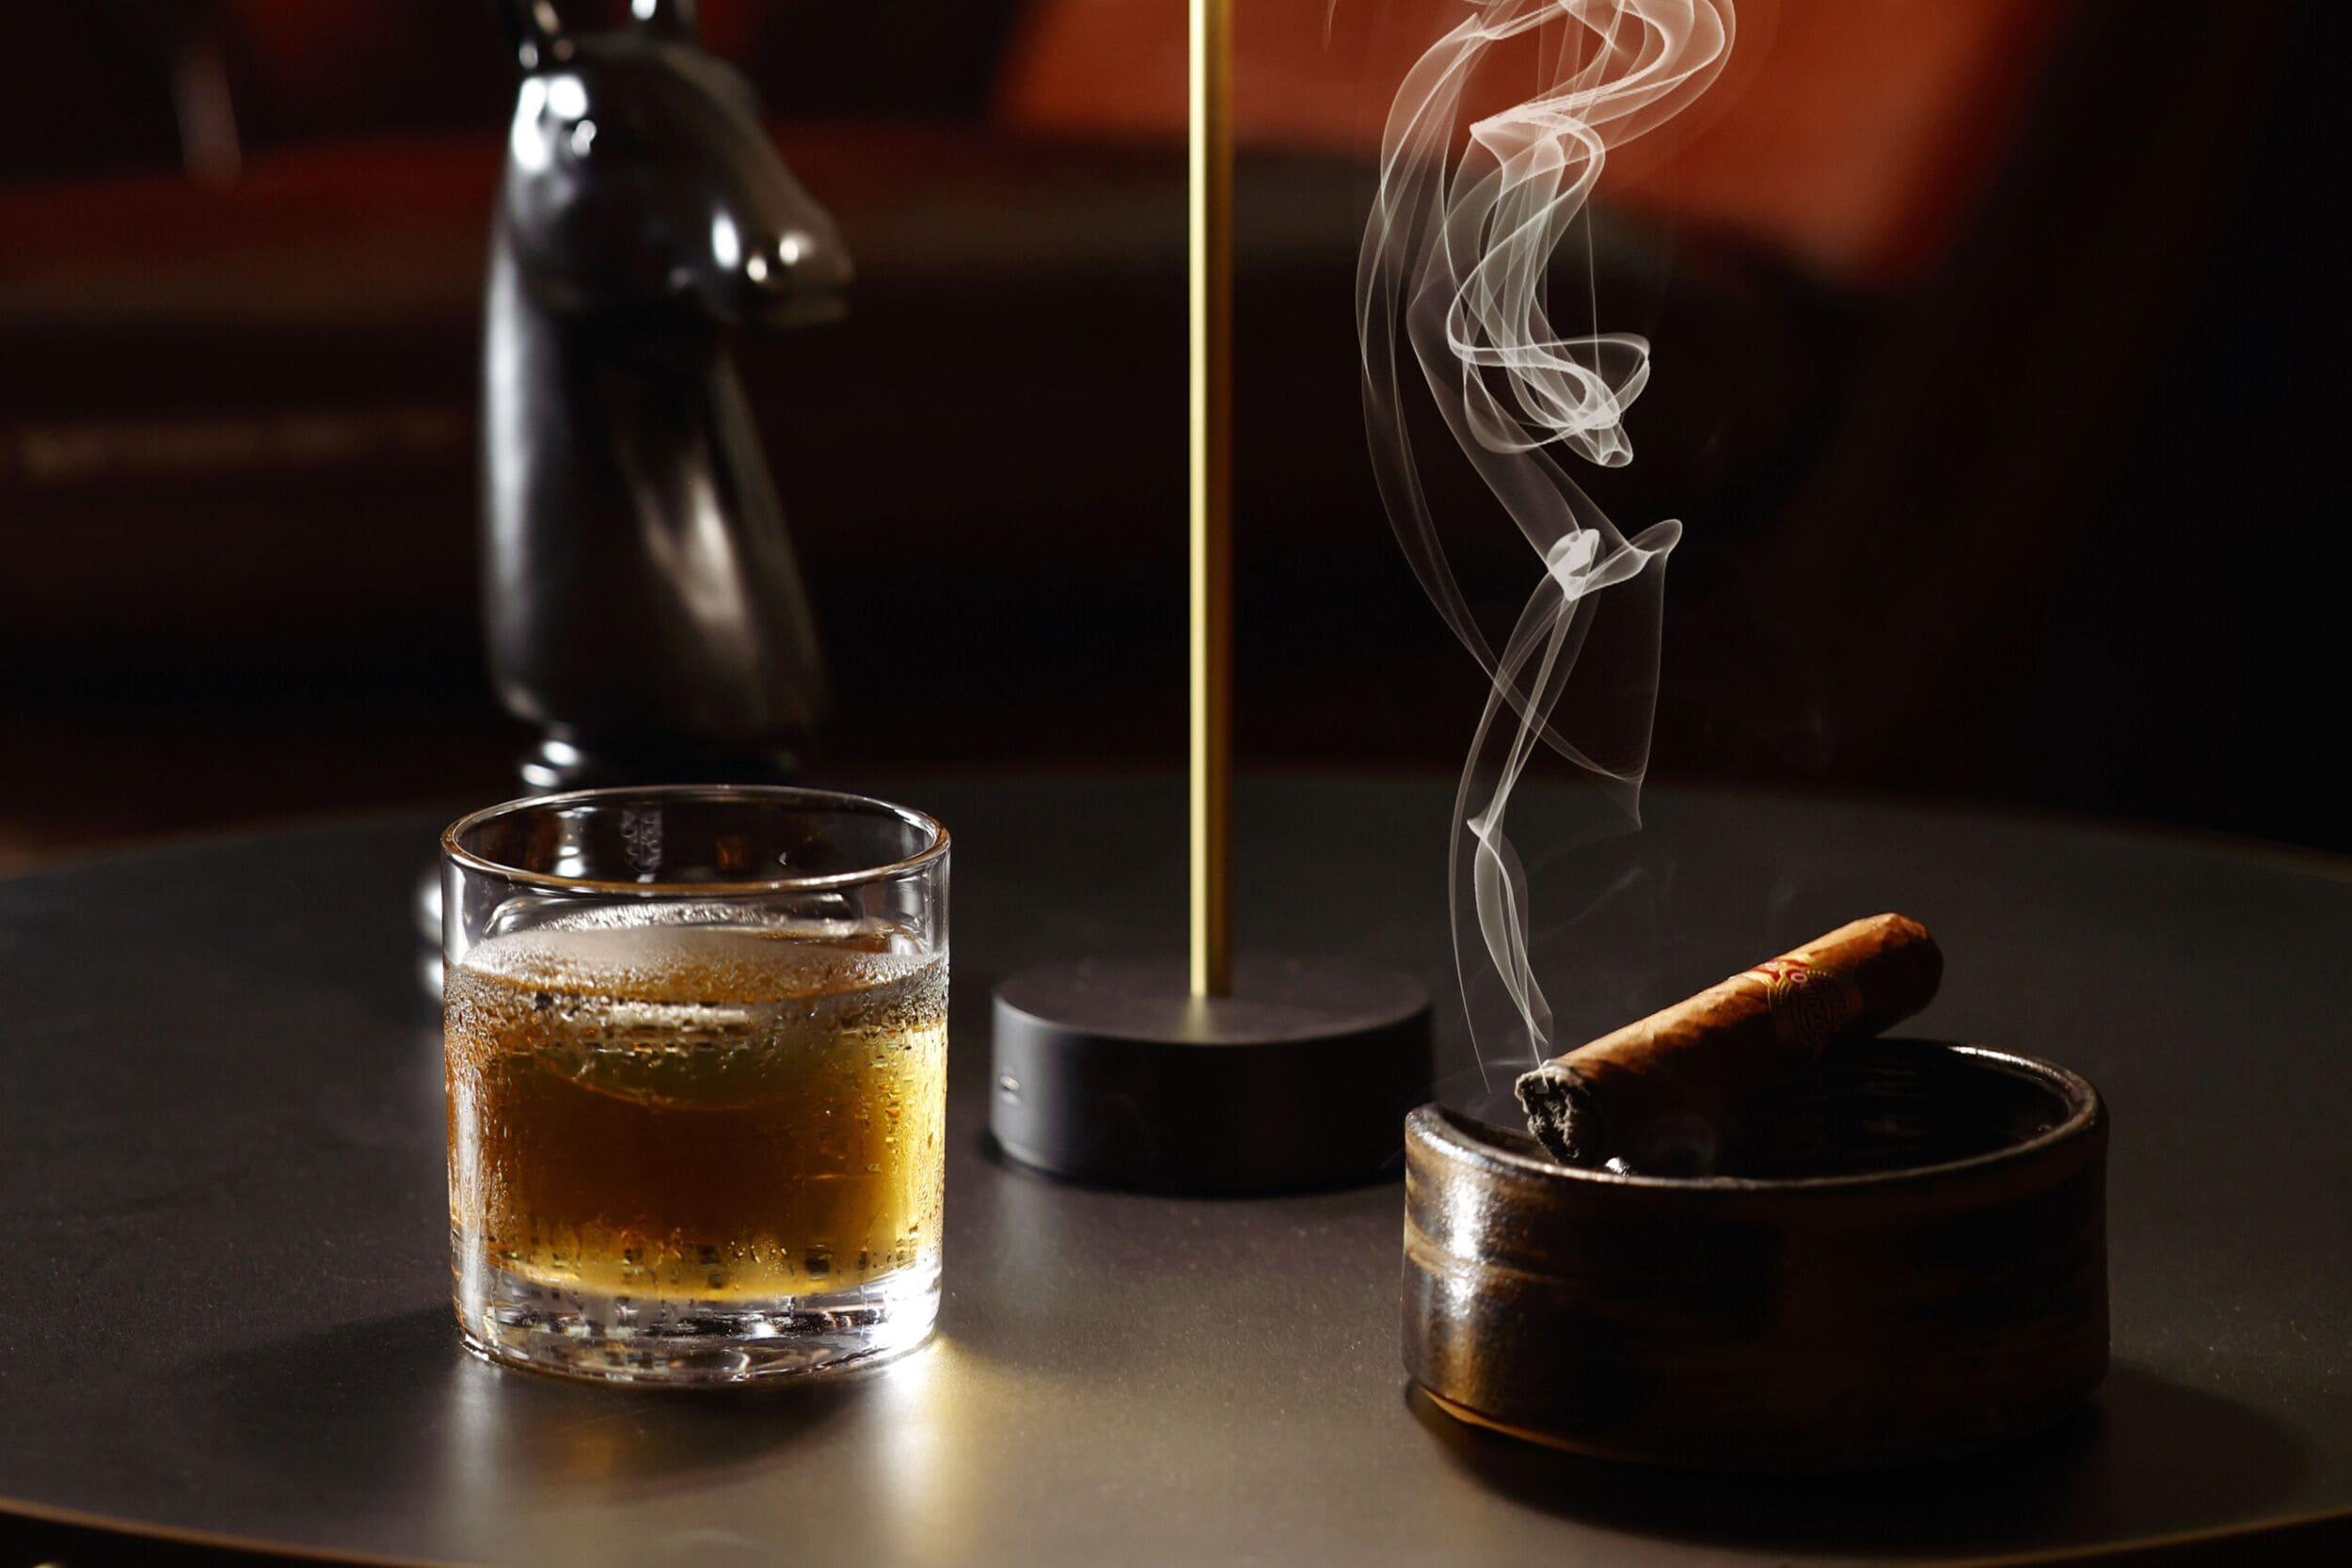 cigar and glass of alcohol